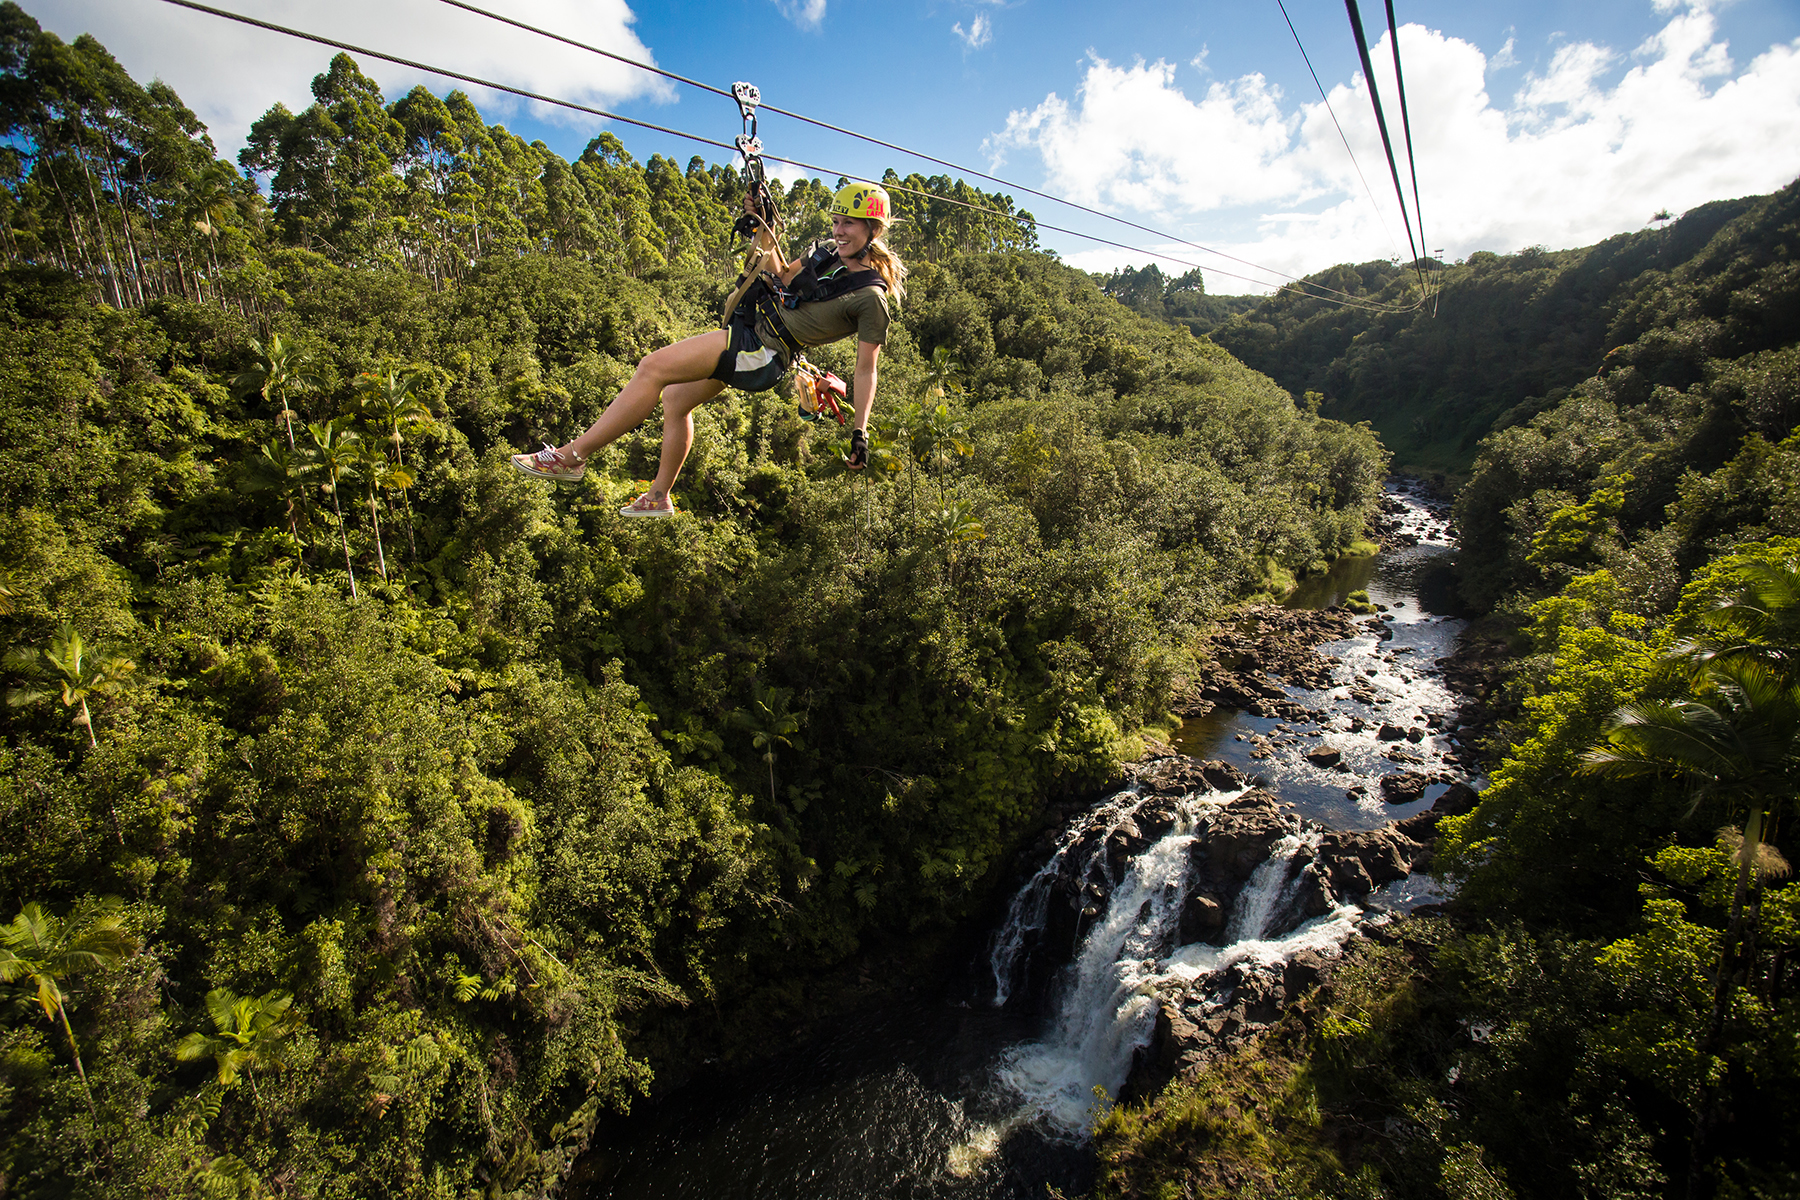 Woman on zipline over river and waterfall